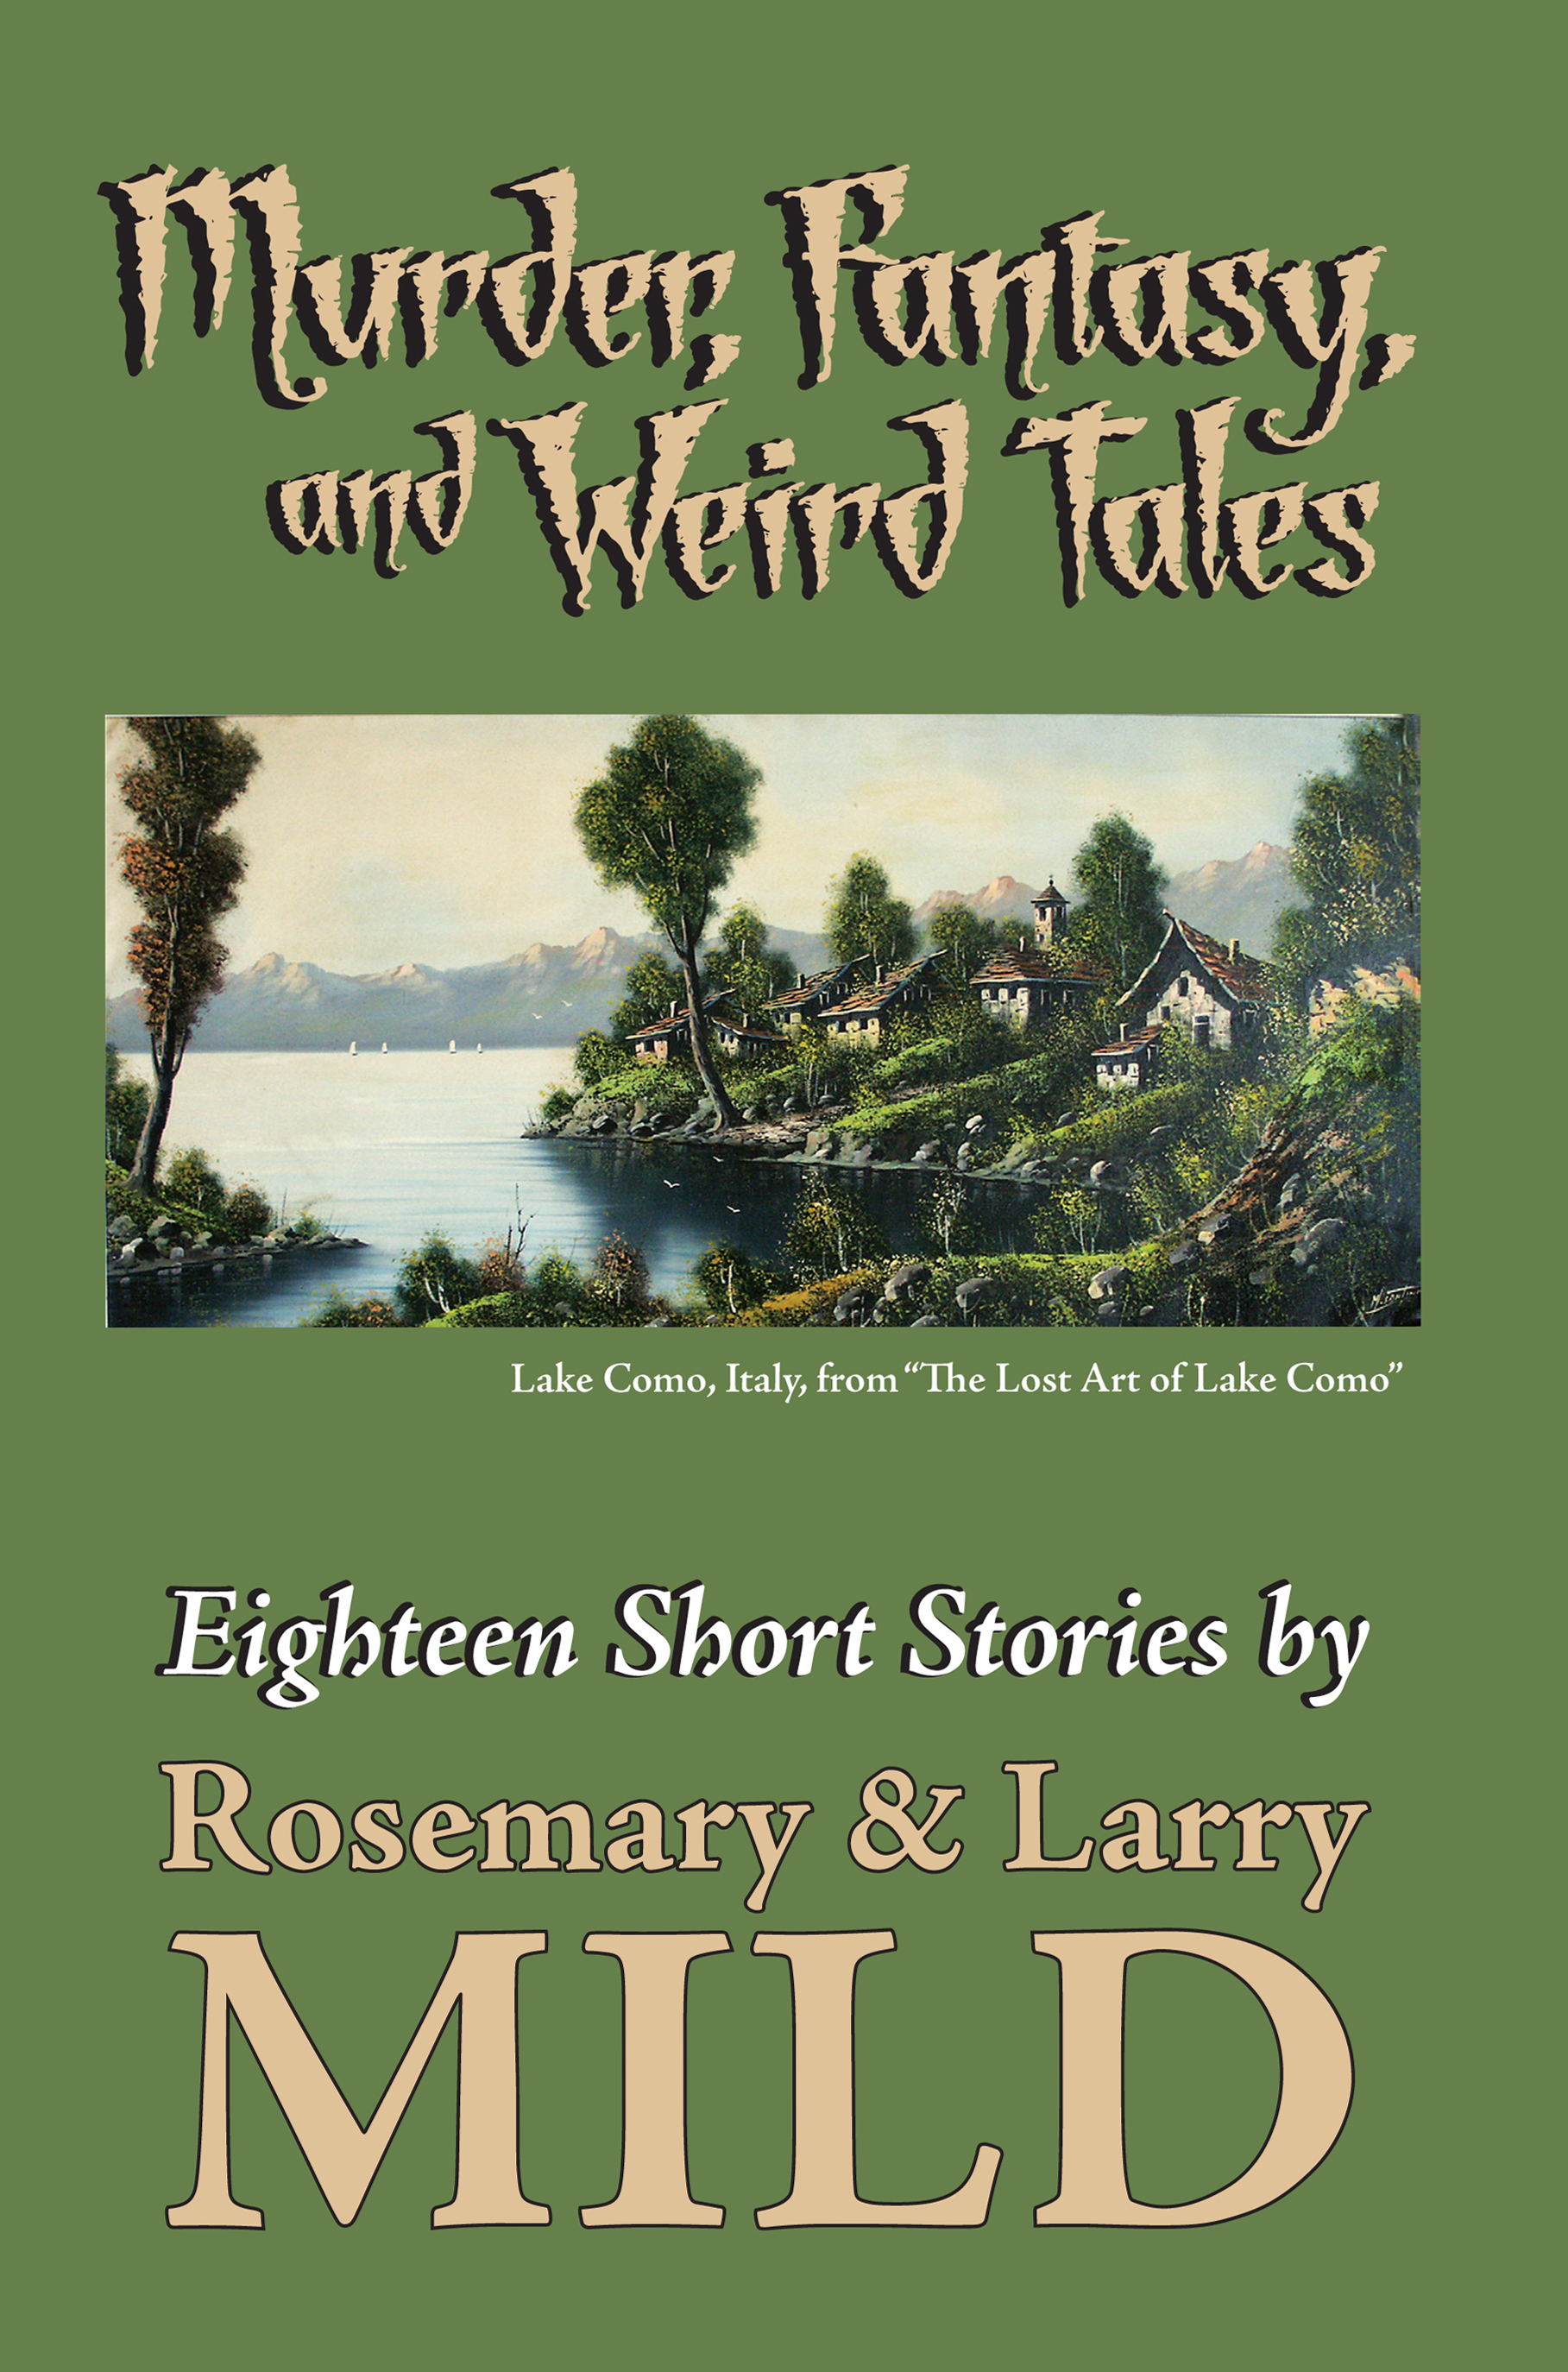 Murder, Fantasy, and Weird Tales--Eighteen Short Stories by Rosemary and Larry Mild